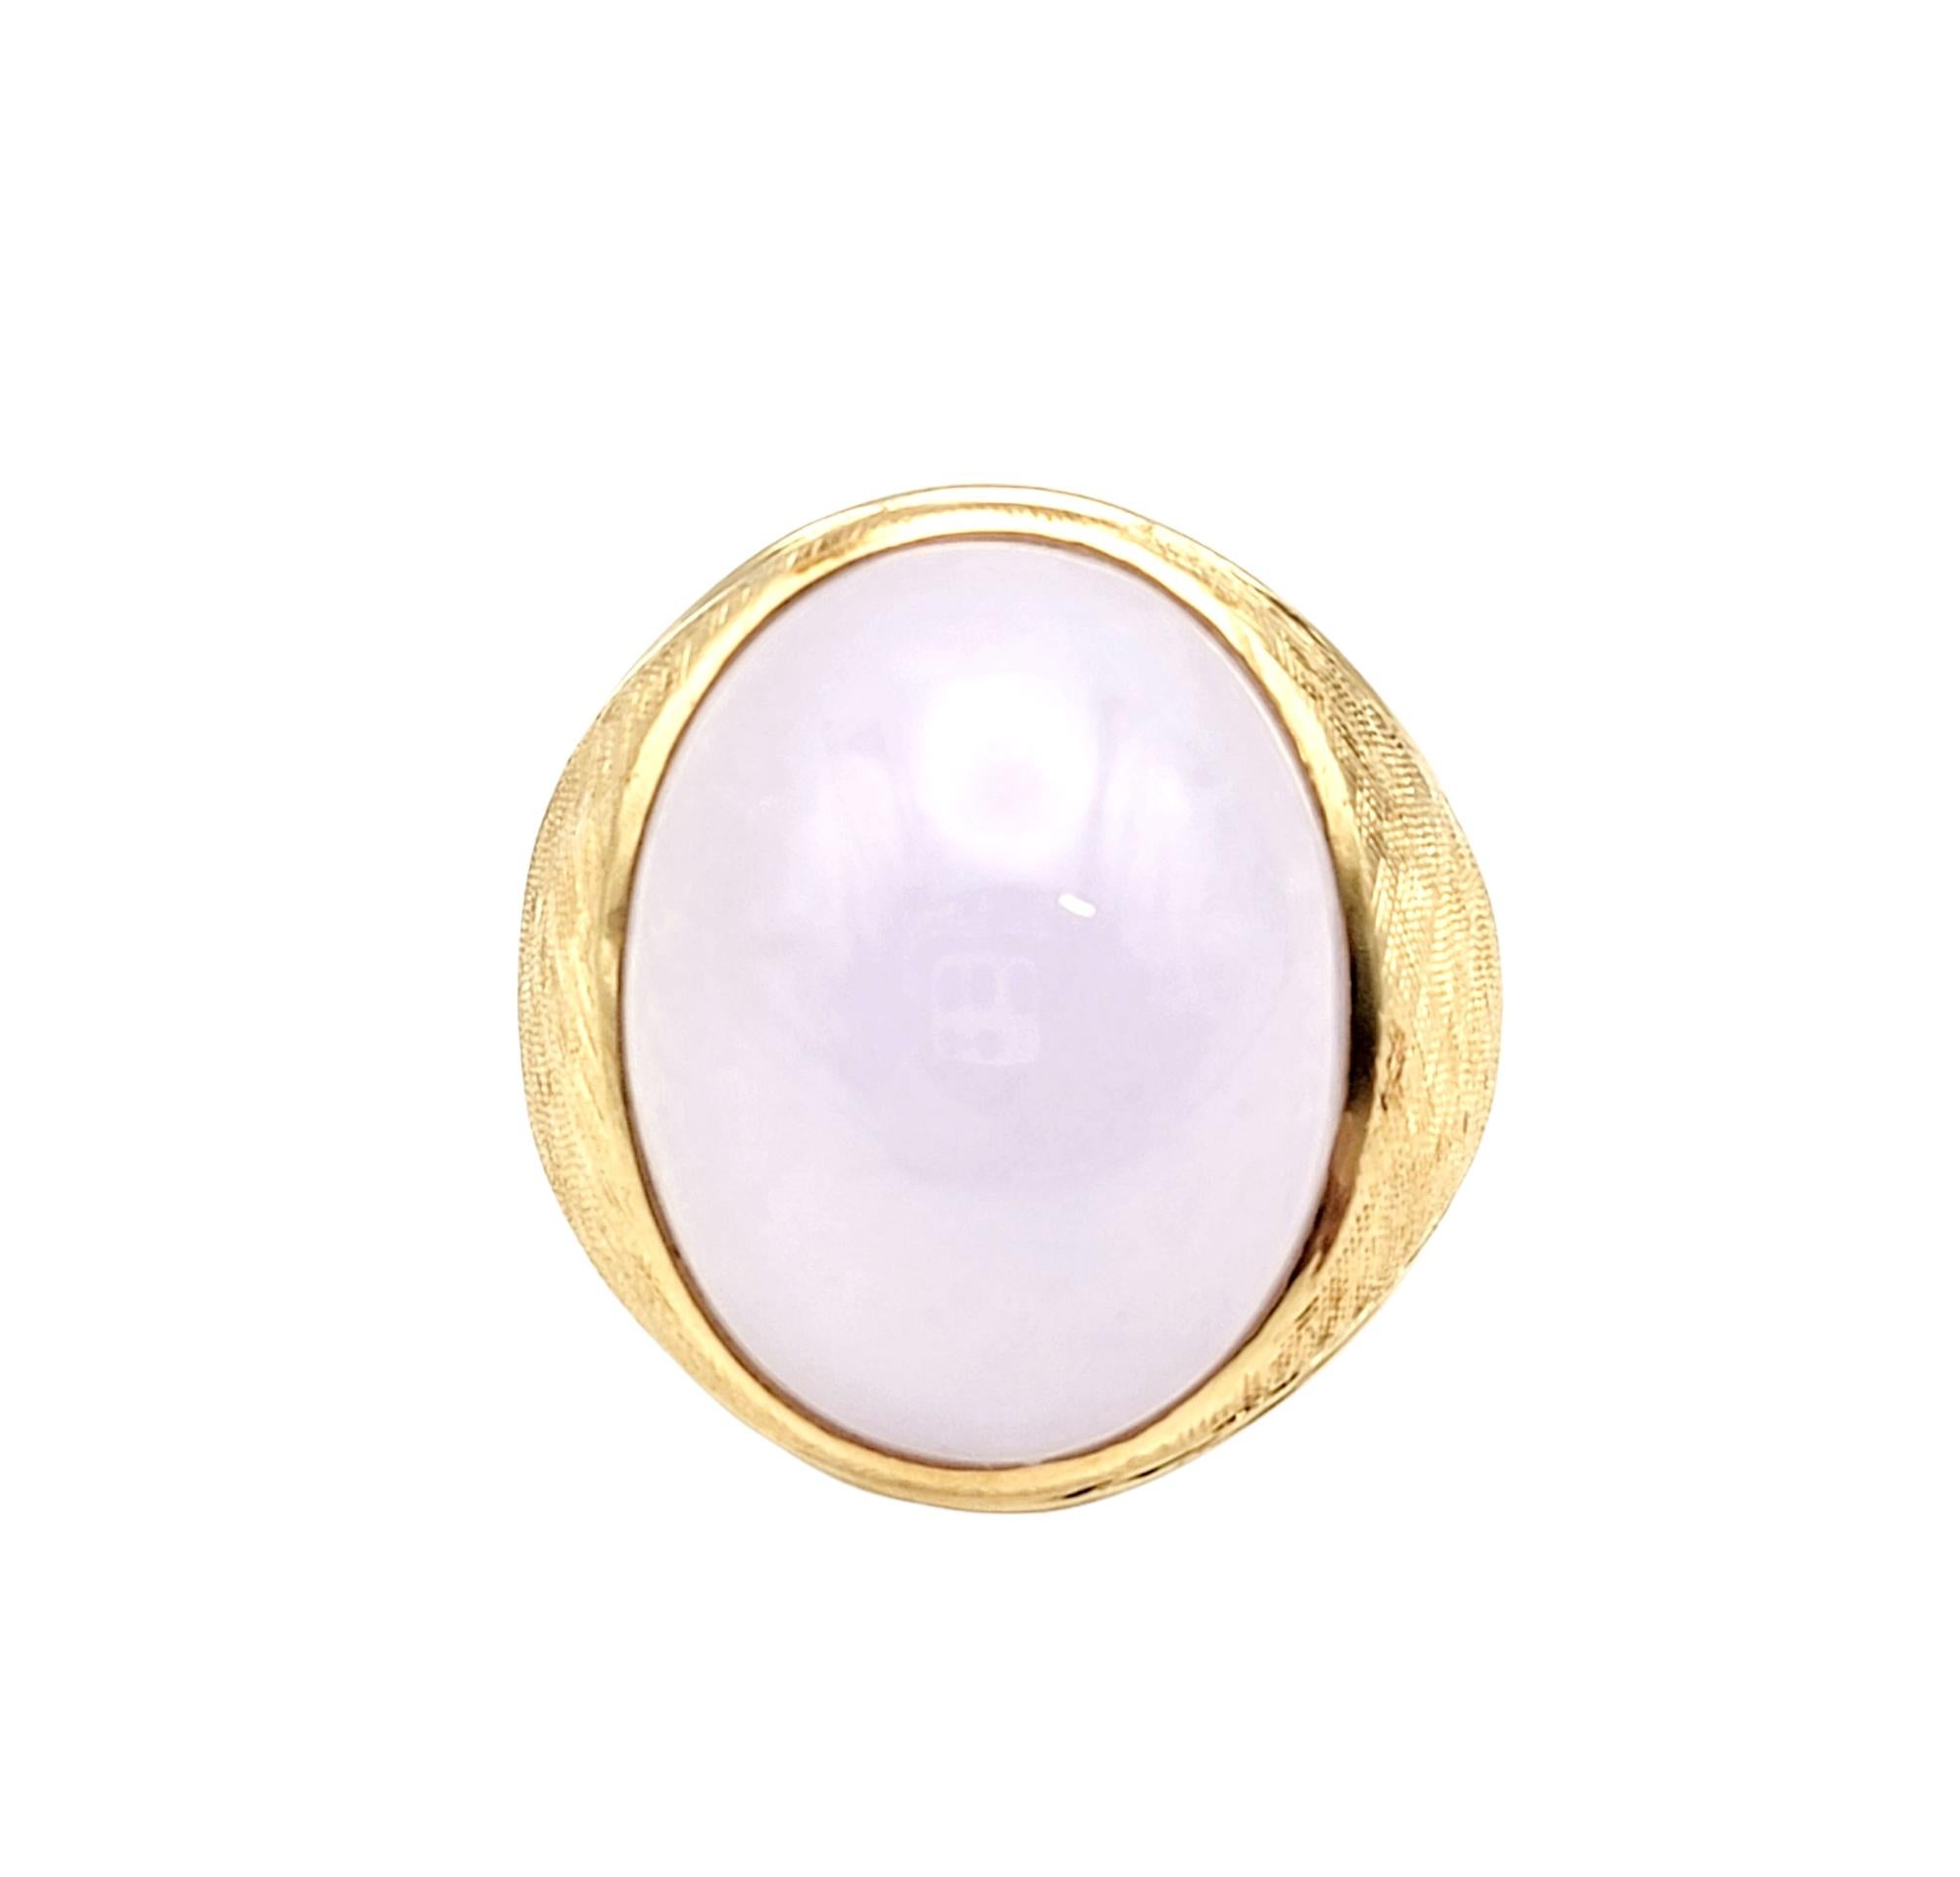 Ring size: 9

This bold and beautiful brushed and polished 14 karat yellow gold and lavender Jadeite cocktail ring is substantial in size and offers a subtle pop of color as it fills the finger.  

Ring Style: Solitaire
Metal: 14 Yellow Gold
Ring